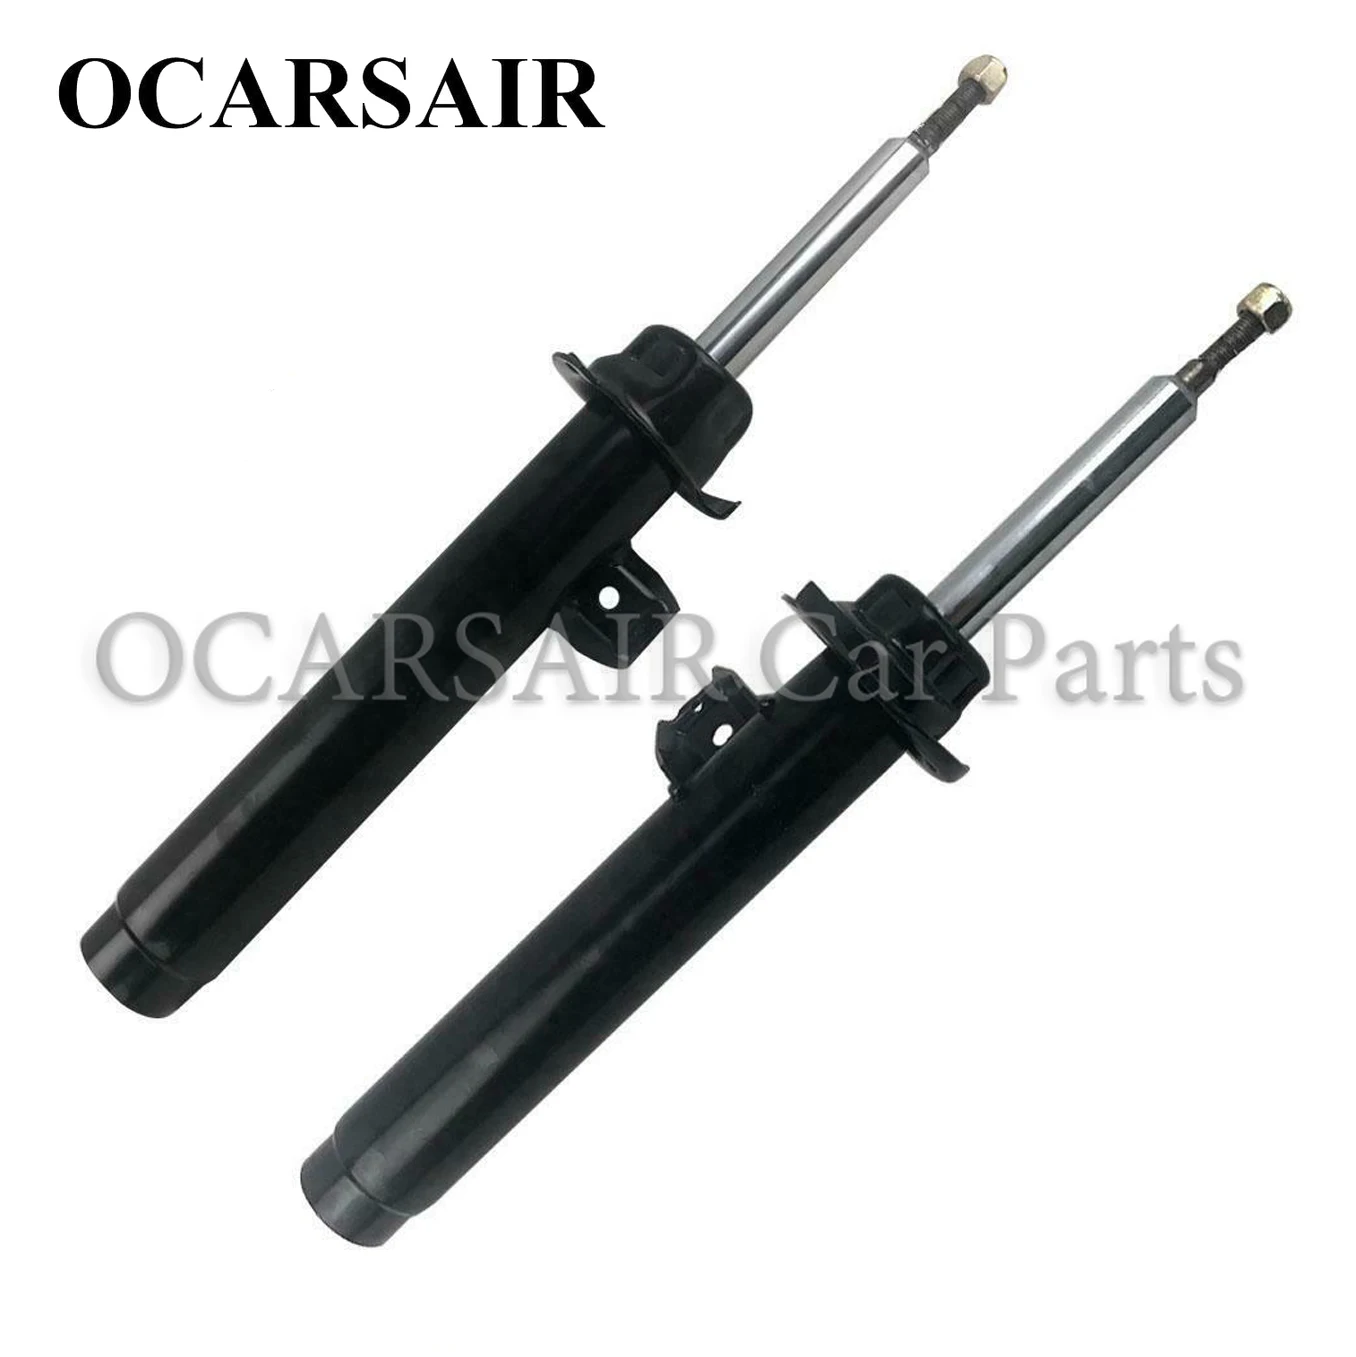 

One Pair Front Left&Right Shock Absorber for BMW X1 E84 E87 2009-2015 31316851333 31316789573 31316851334 31316789574